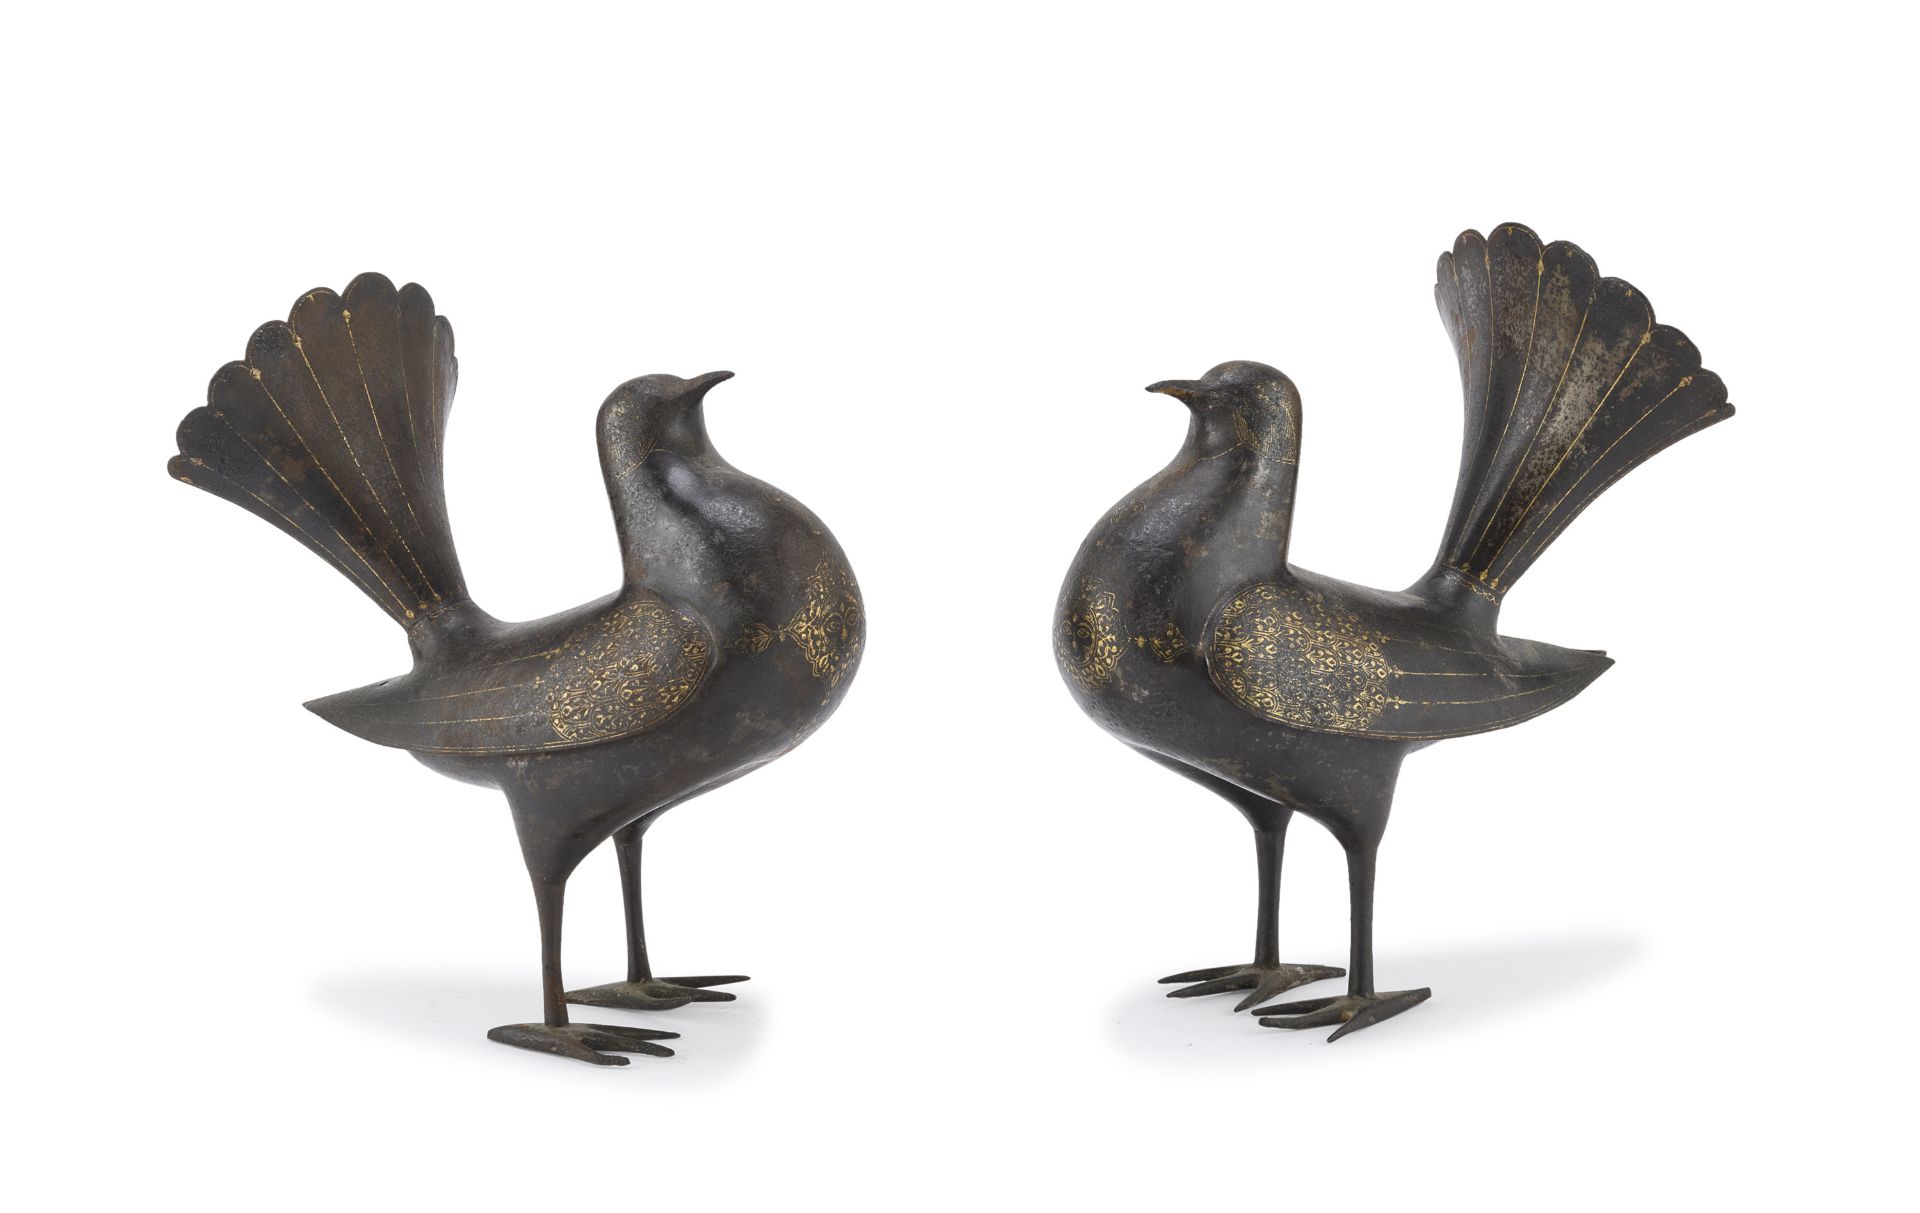 RARE PAIR OF COPPER SCULPTURES OF BIRDS FRANCE LIMOGES 16TH CENTURY